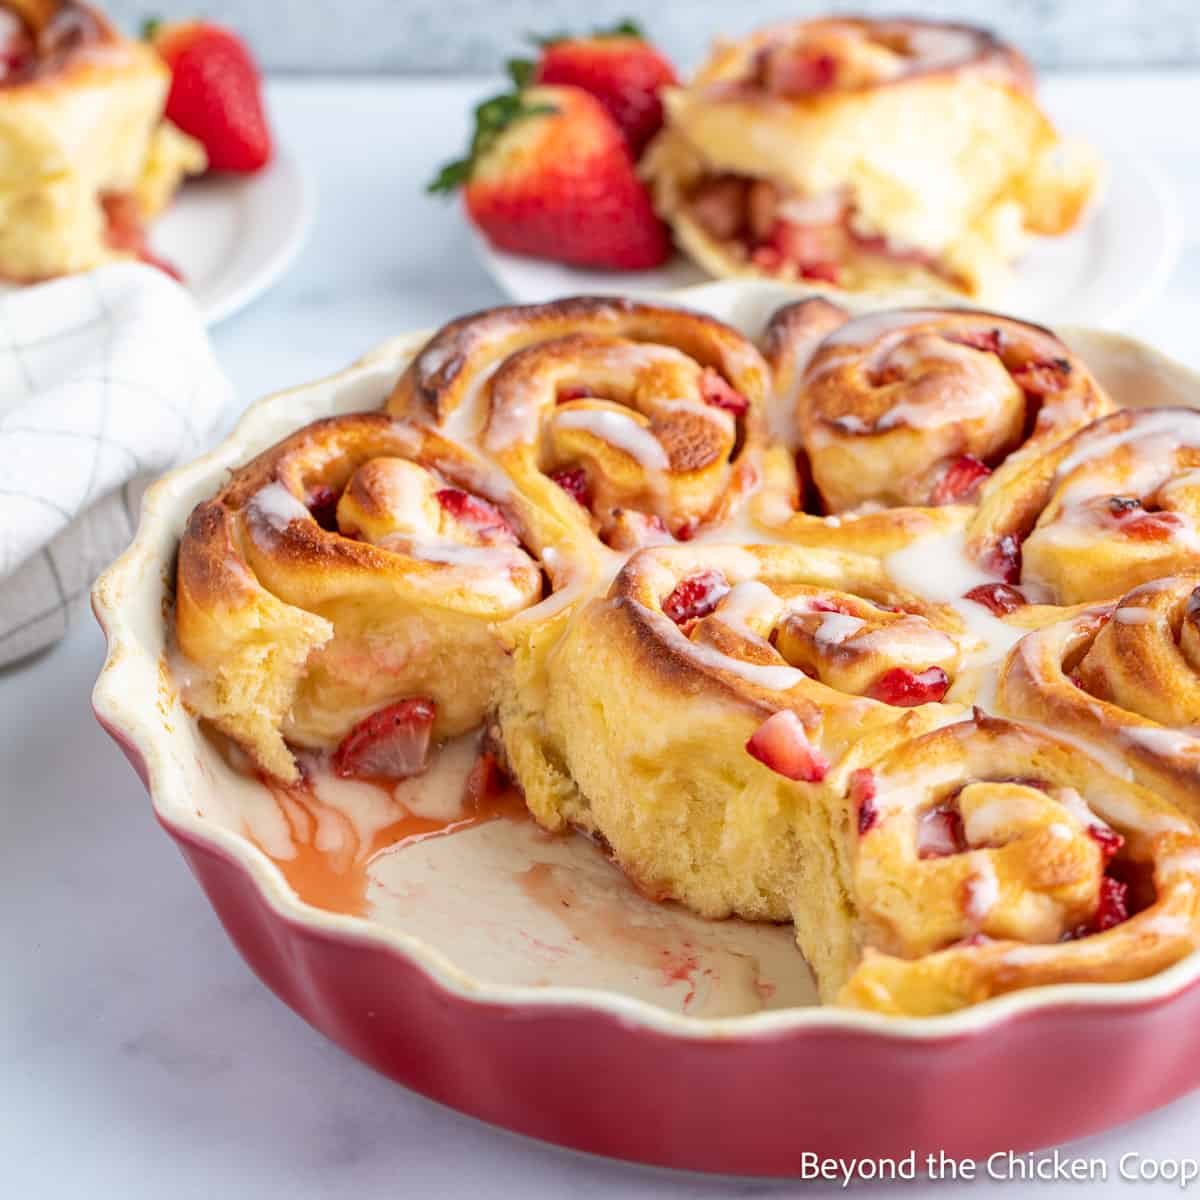 Cinnamon rolls filled with strawberries in a red dish.